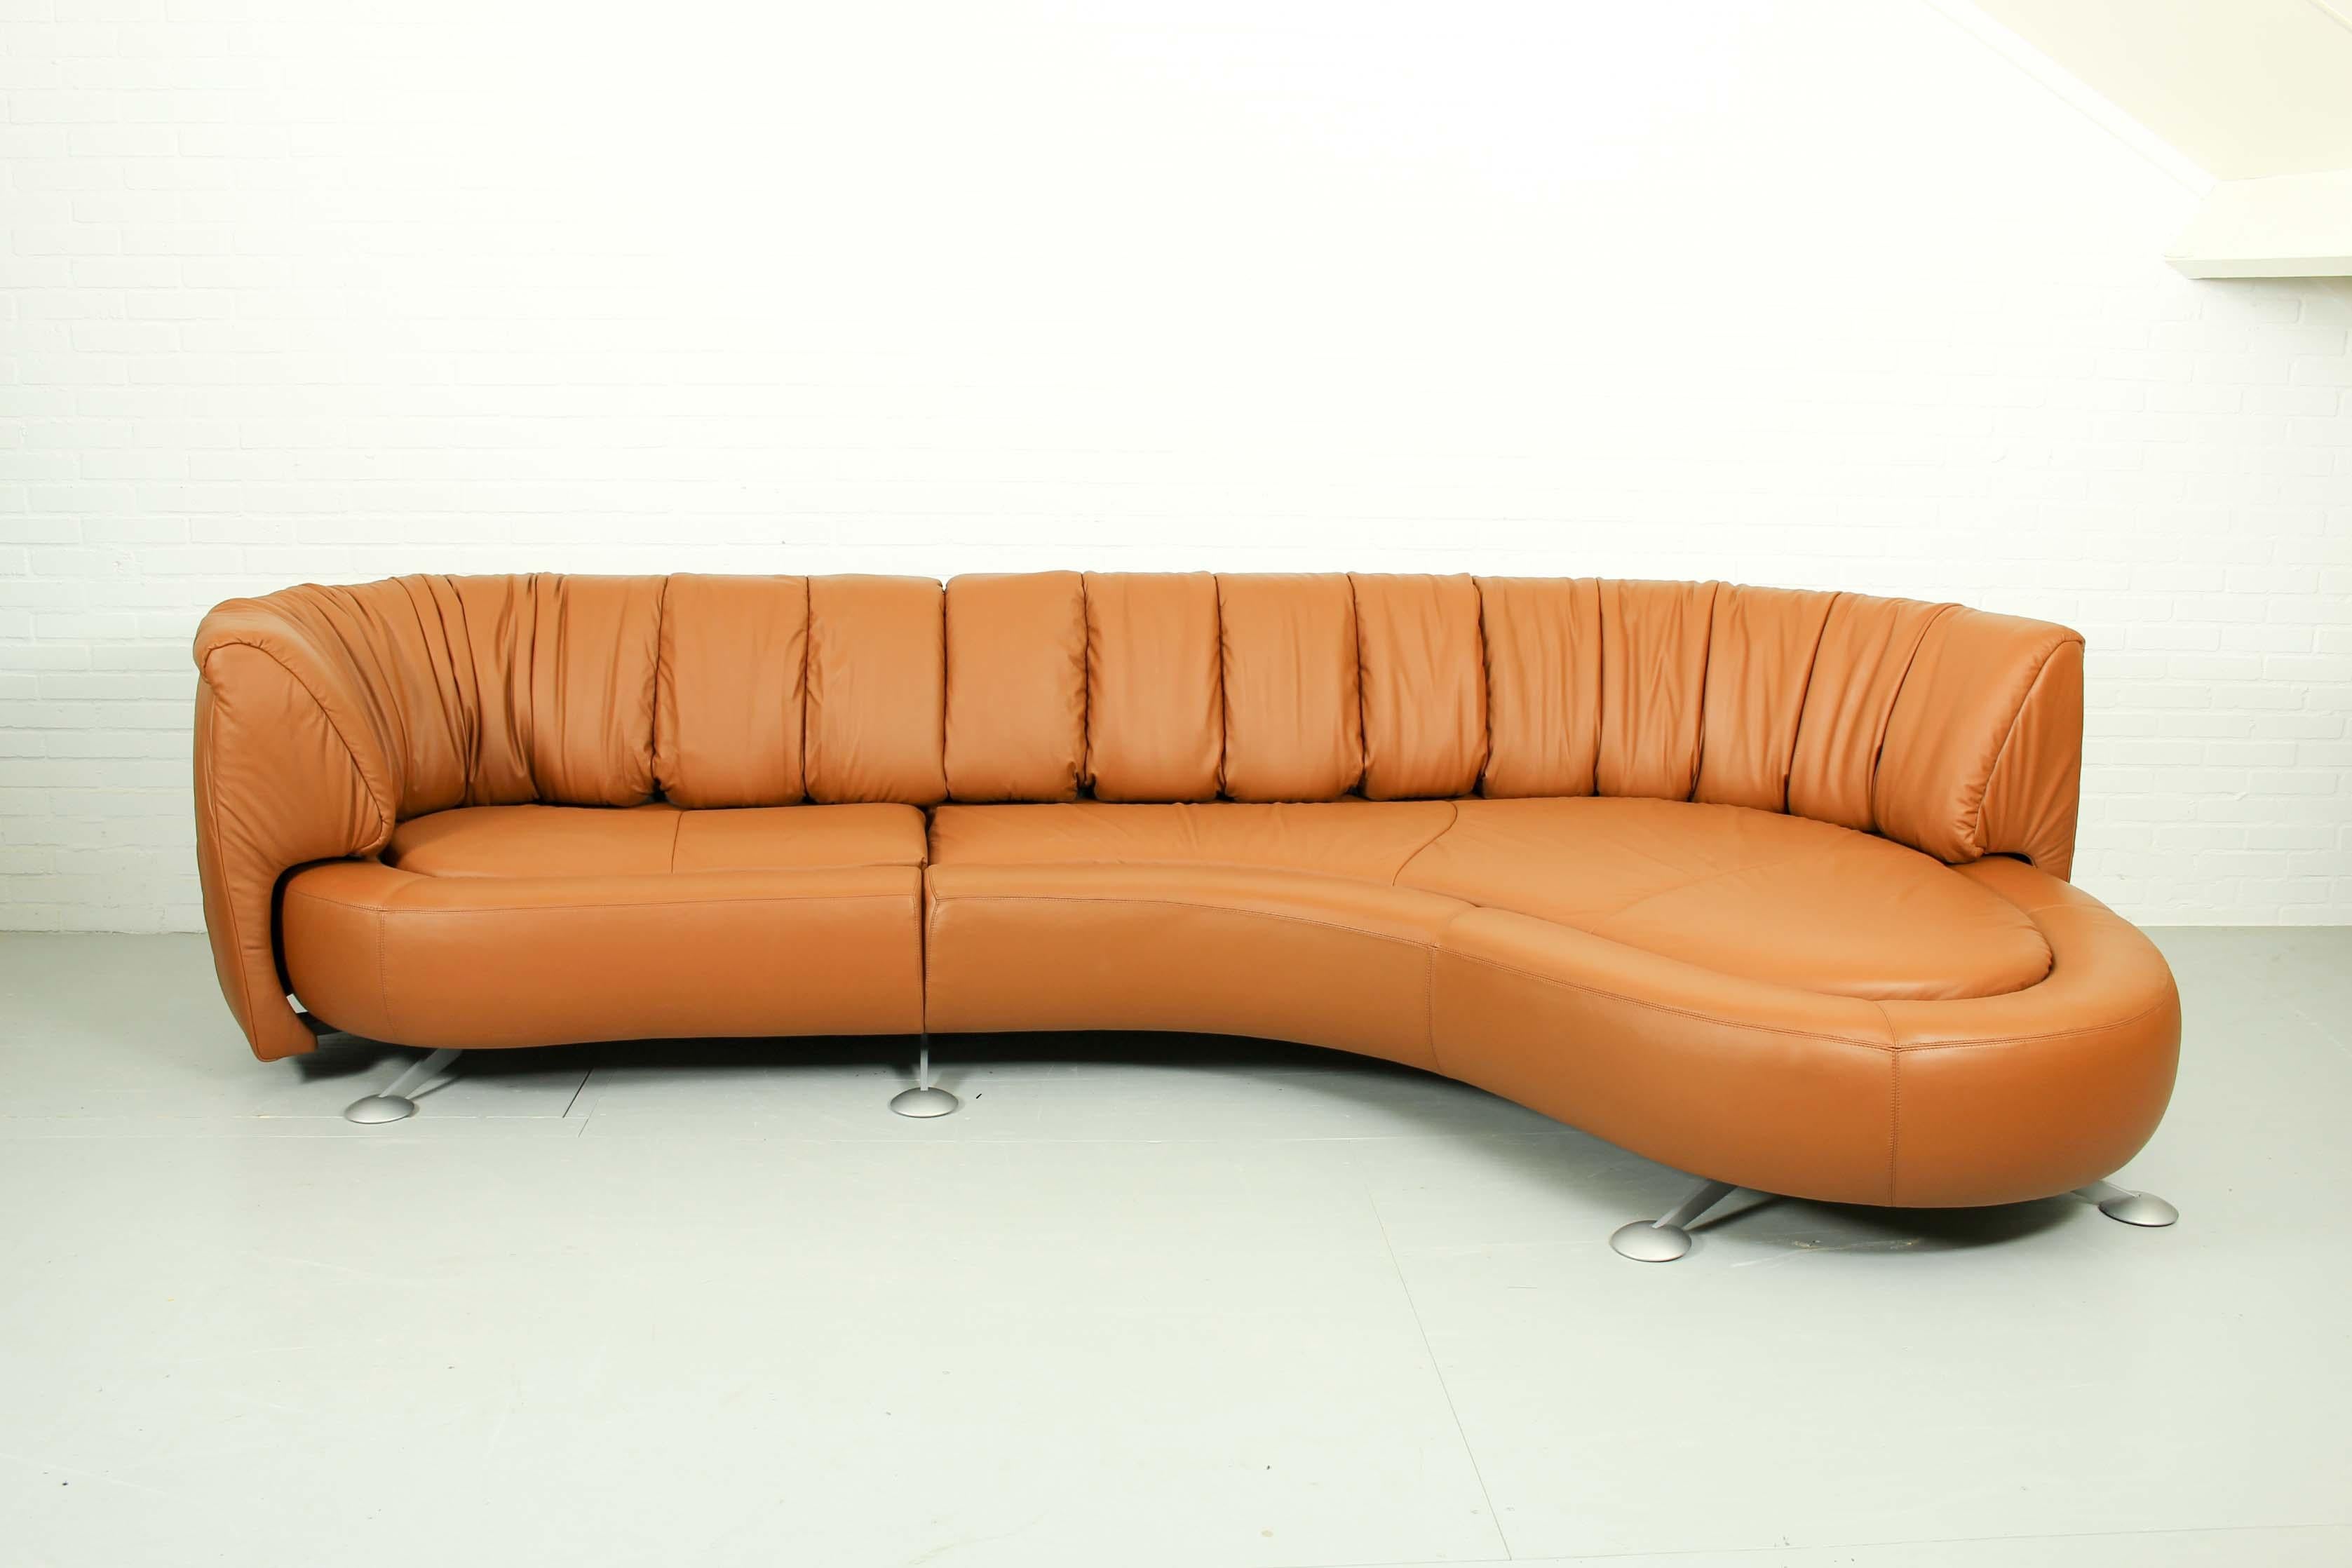 This modular sofa system was designed by Hugo de Ruiter for Swiss manufacturer De Sede. It was produced in 2011 and has been reupholstered recently with Elmosoft leather. This piece consists of two base parts with chromed feet and two movable